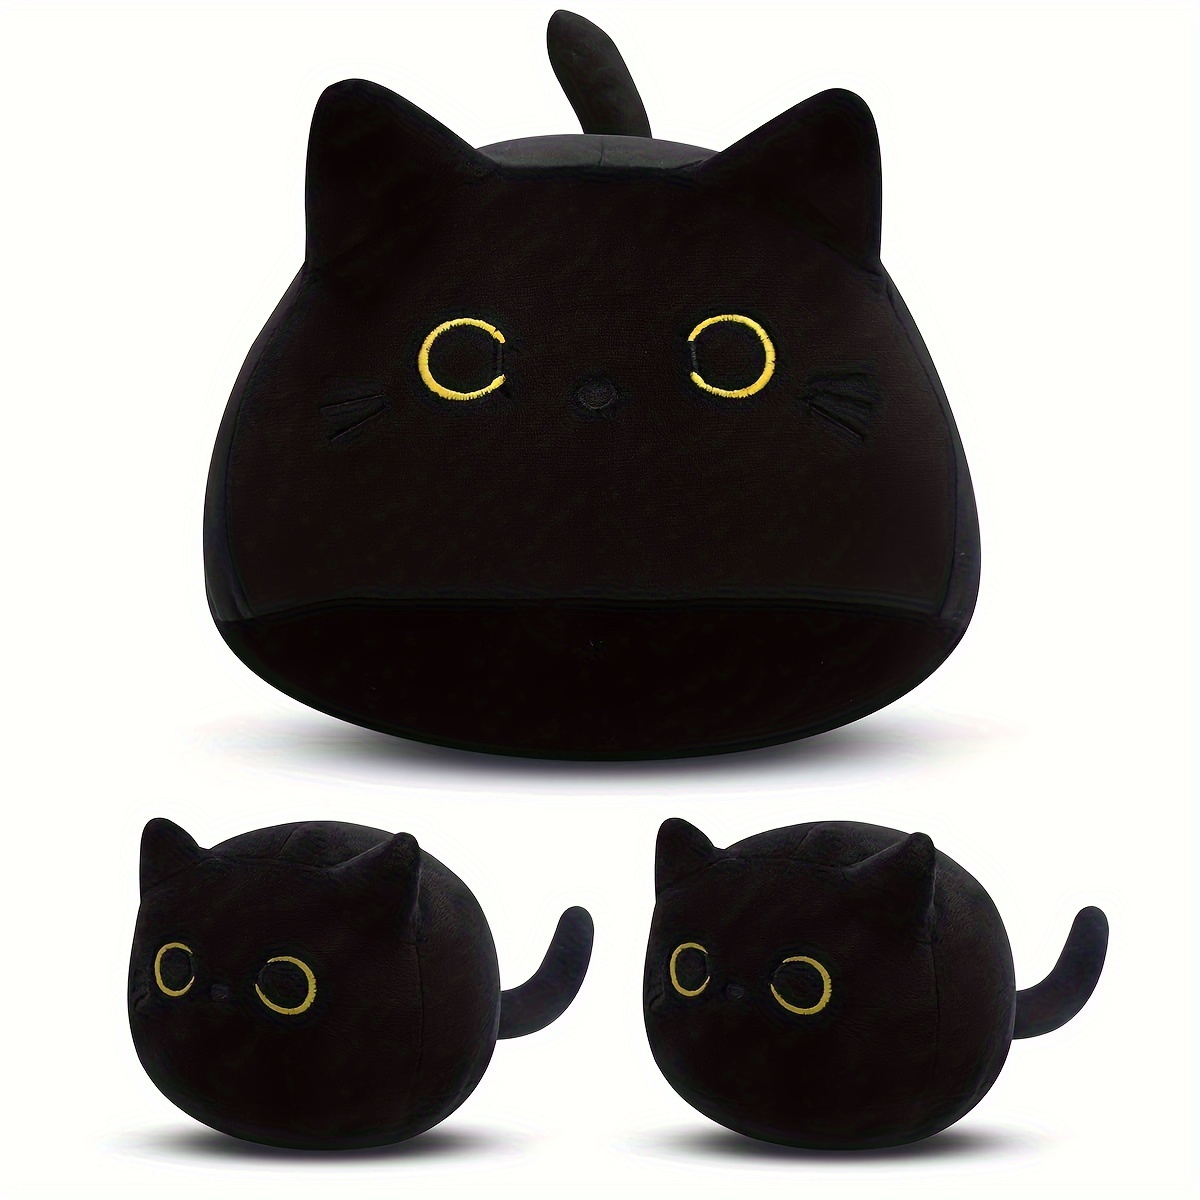 Adorable Plush Black Cat Stuffed Toy - Perfect Birthday Gift For Kids ...